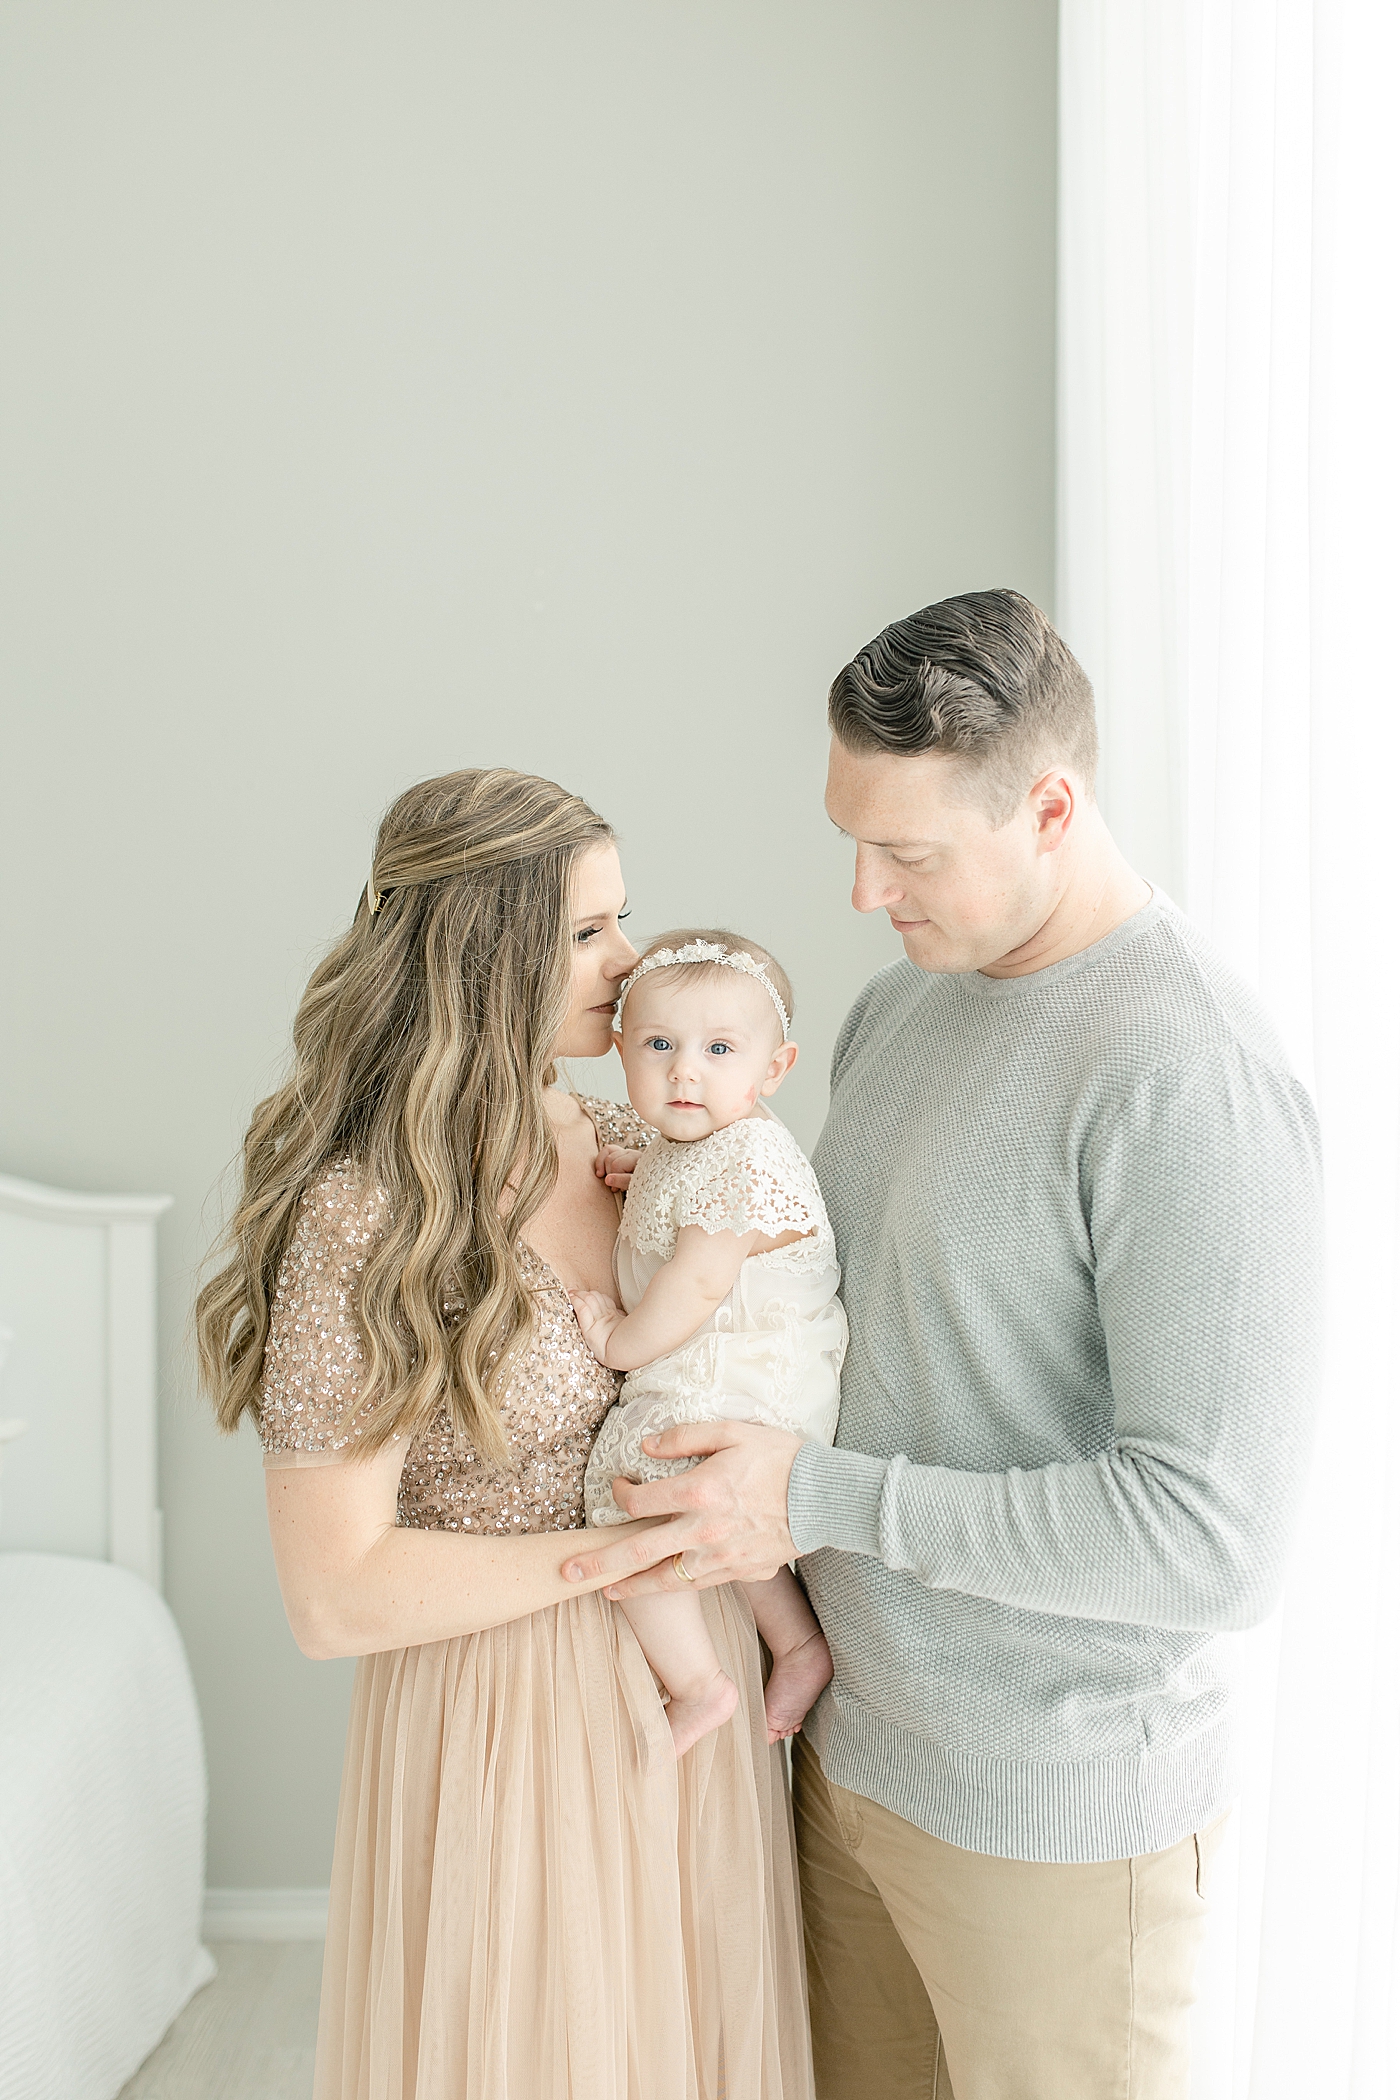 Mom and dad snuggling their baby girl | Photo by Little Sunshine Photography